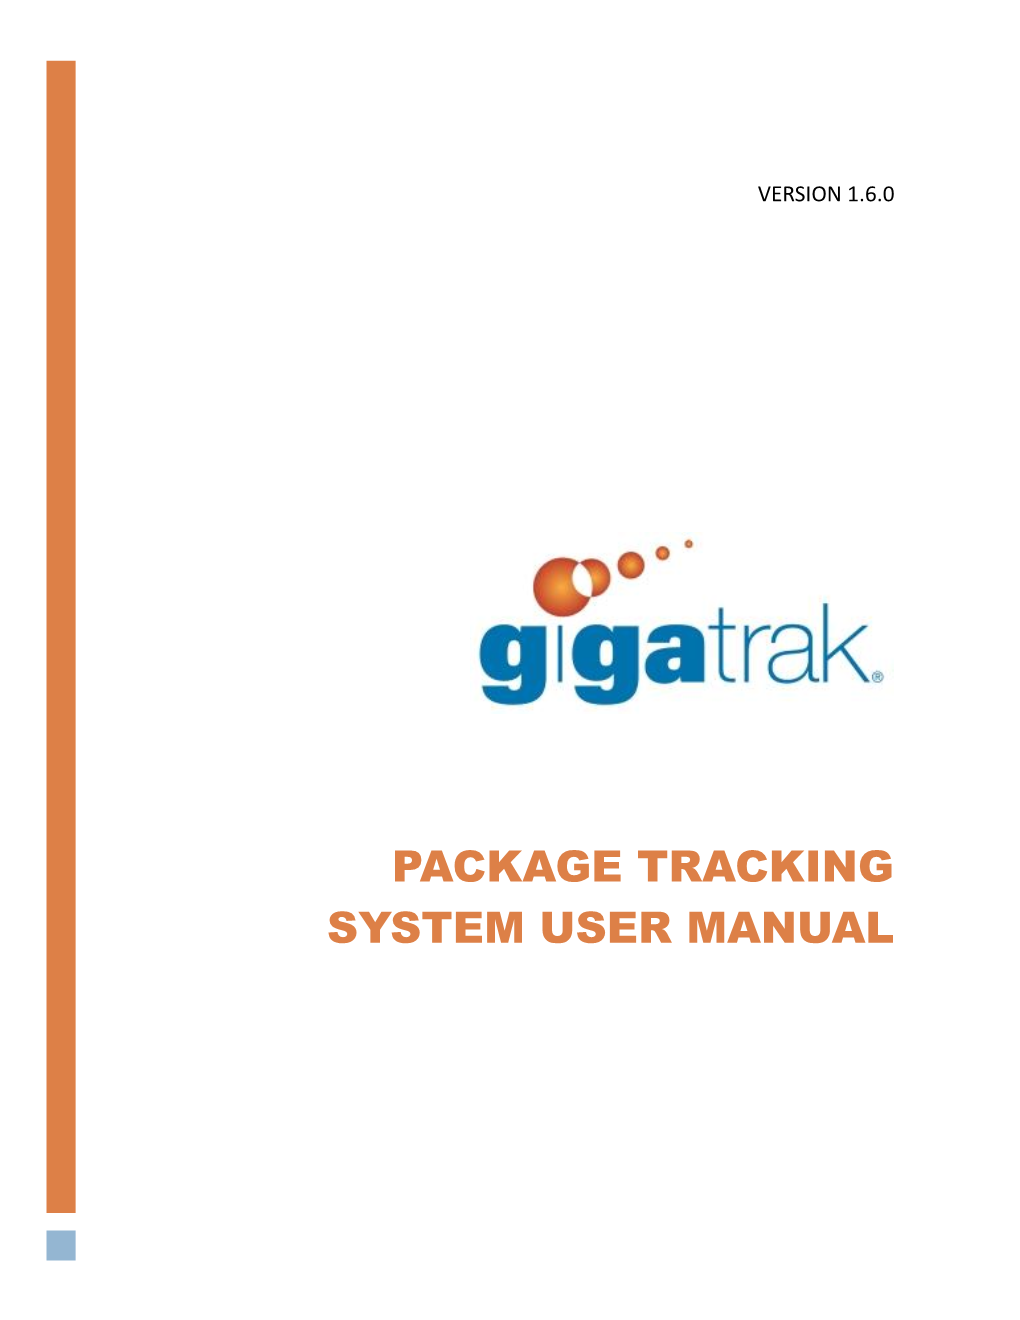 Package Tracking System User Manual